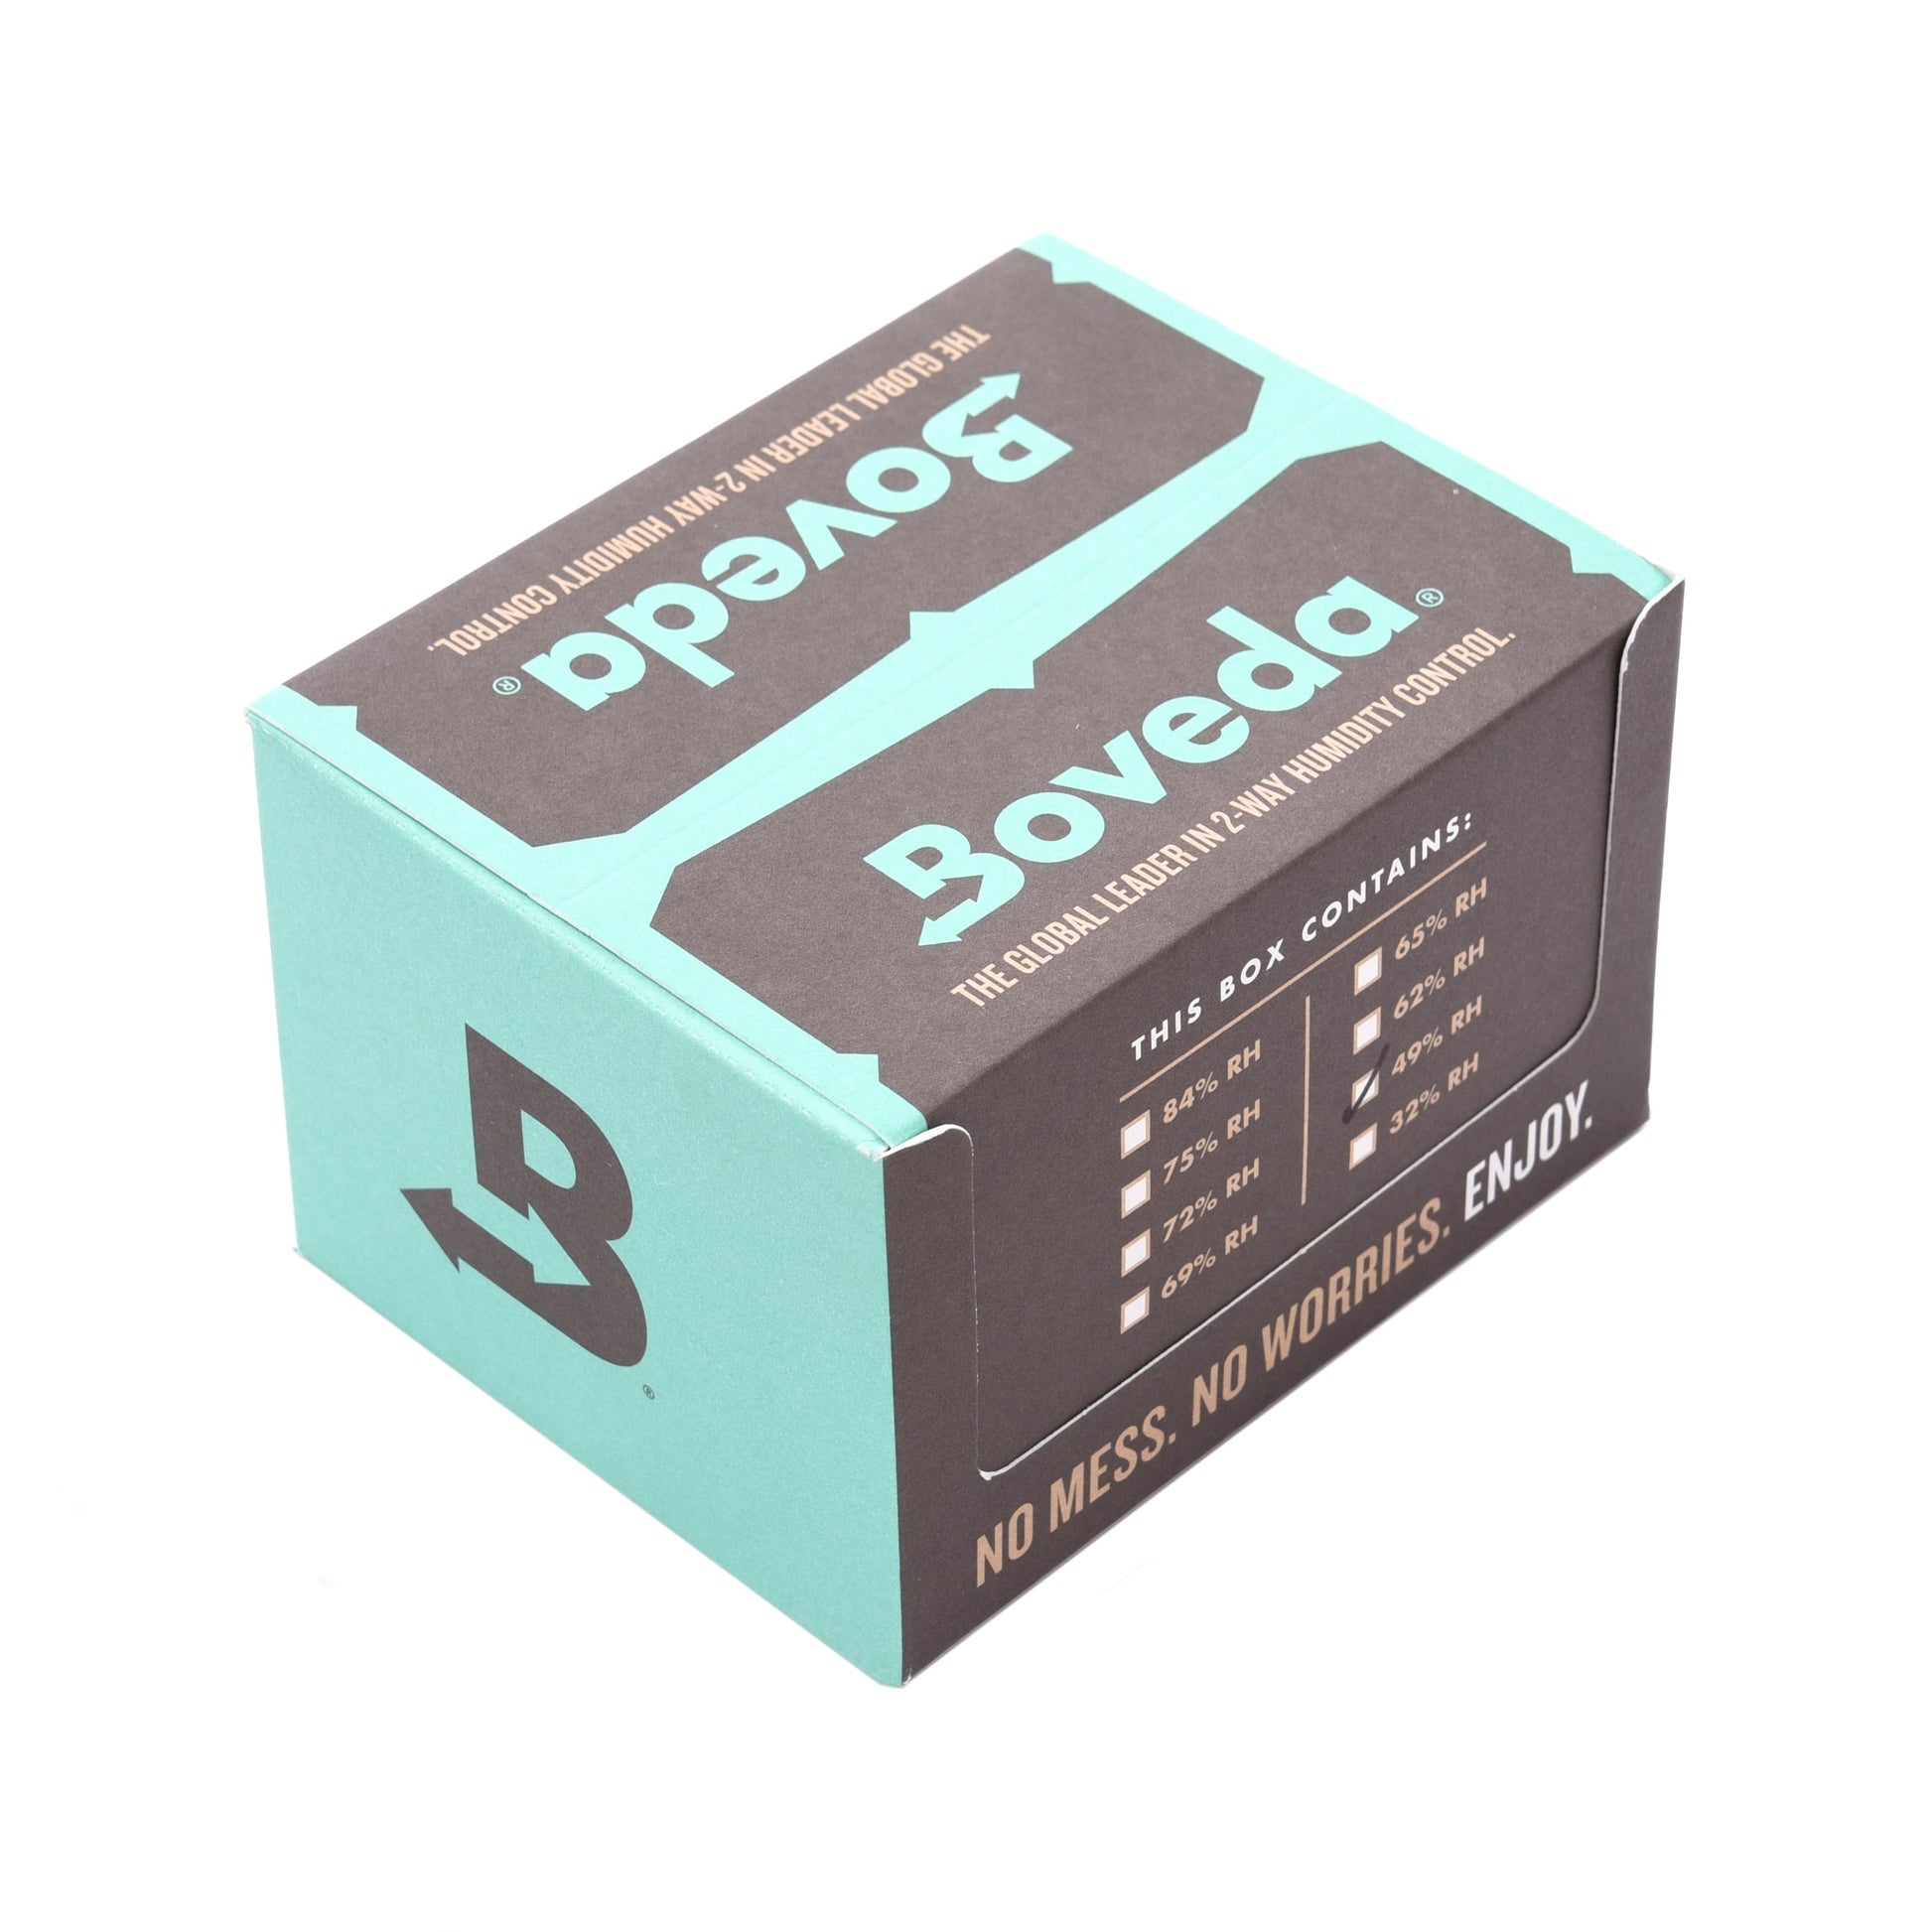 Boveda 2-Way Humidity Control 12-Pack Retail Carton 49% RH Size 70 Accessories / Humidifiers